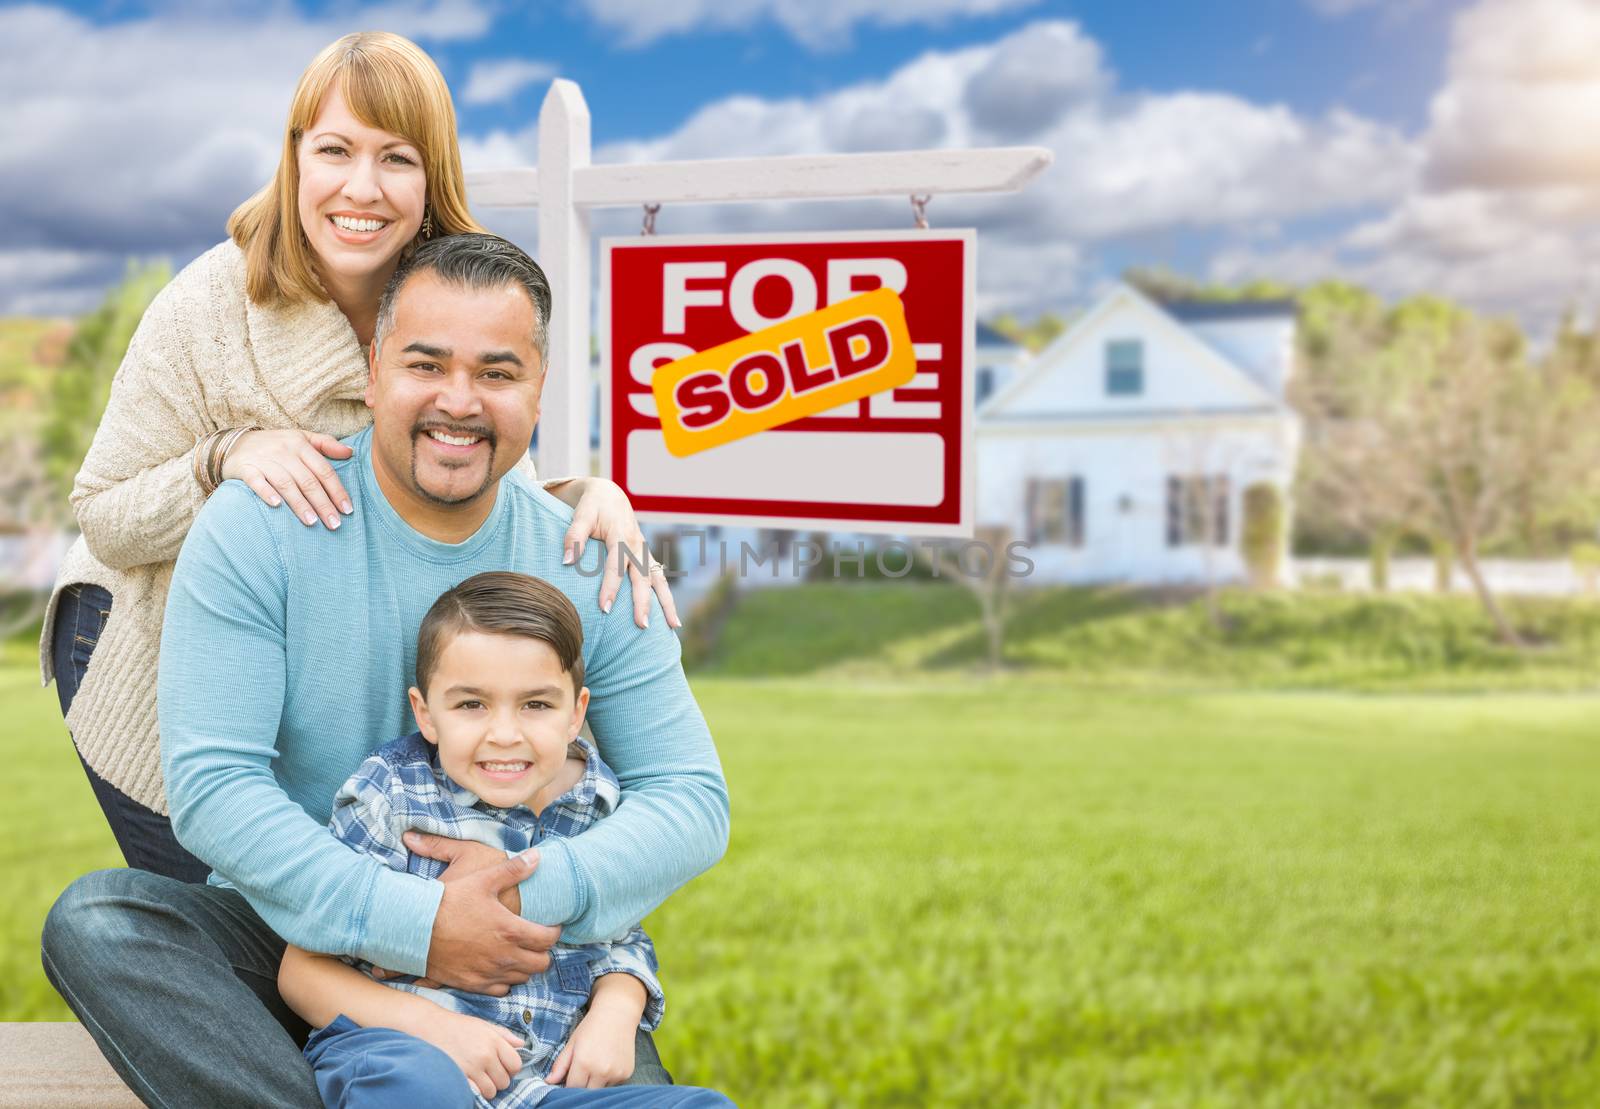 Mixed Race Family In Front of House and Sold For Sale Real Estat by Feverpitched